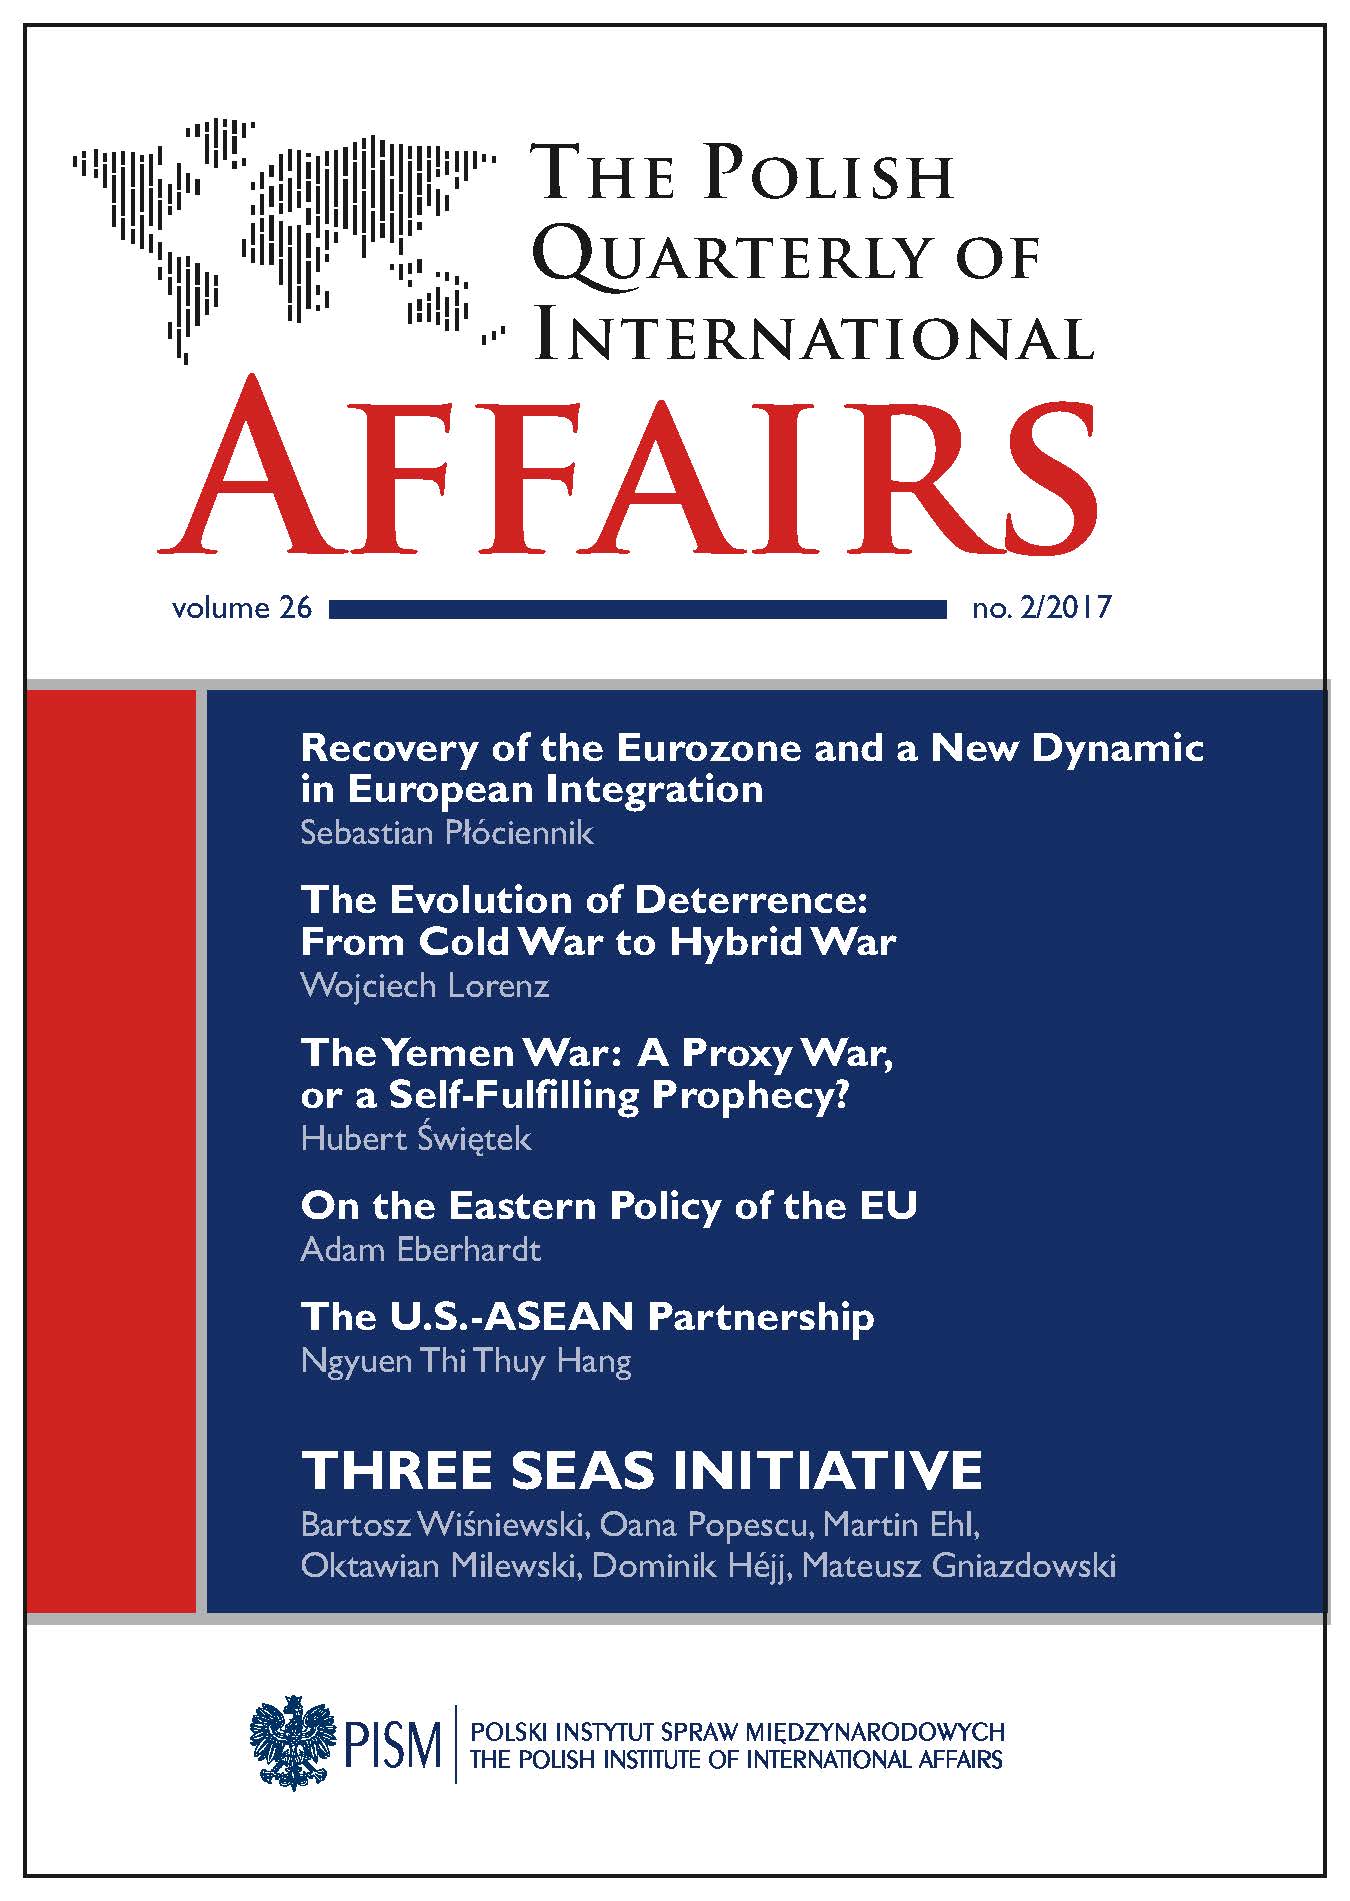 Comments on the Structure of the Three Seas Initiative and the Warsaw Summit Cover Image